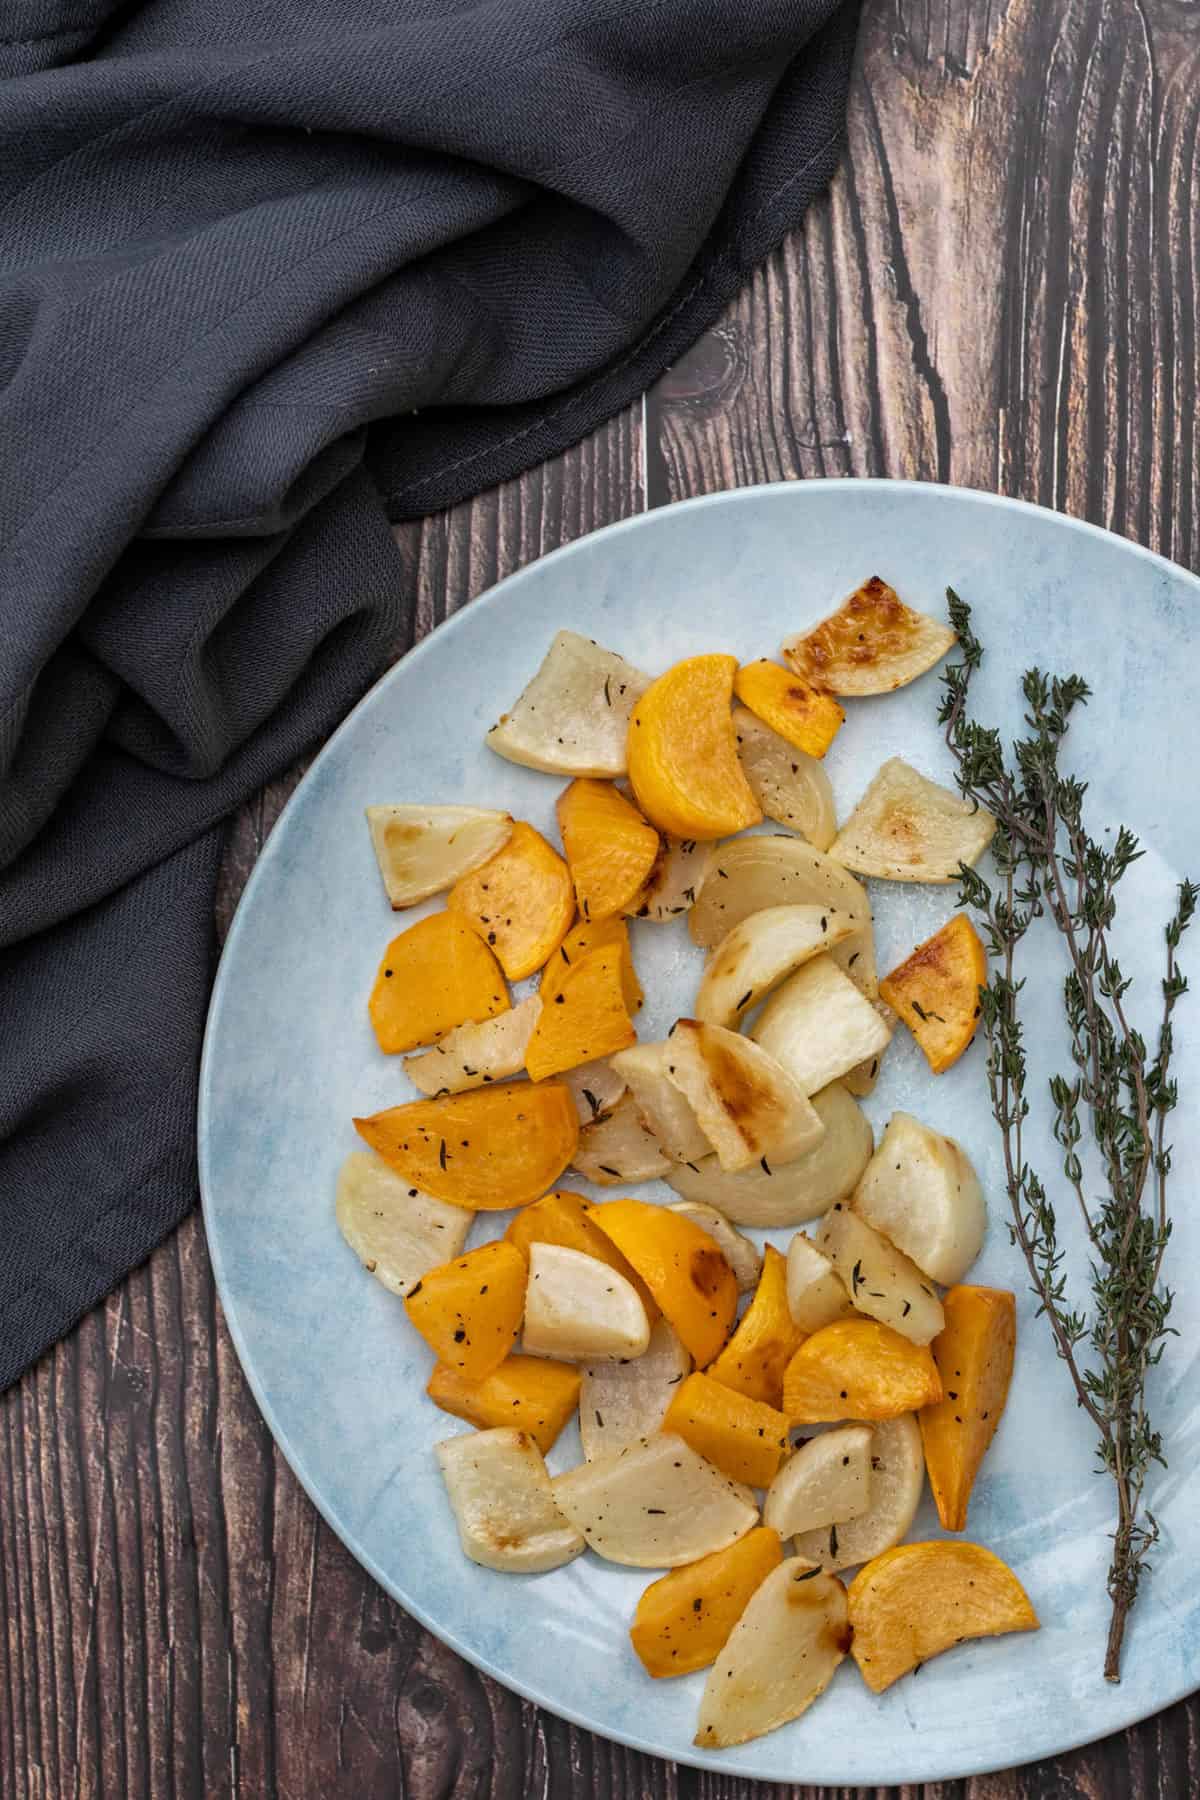 plate of roasted turnips with thyme on wooden background with towel